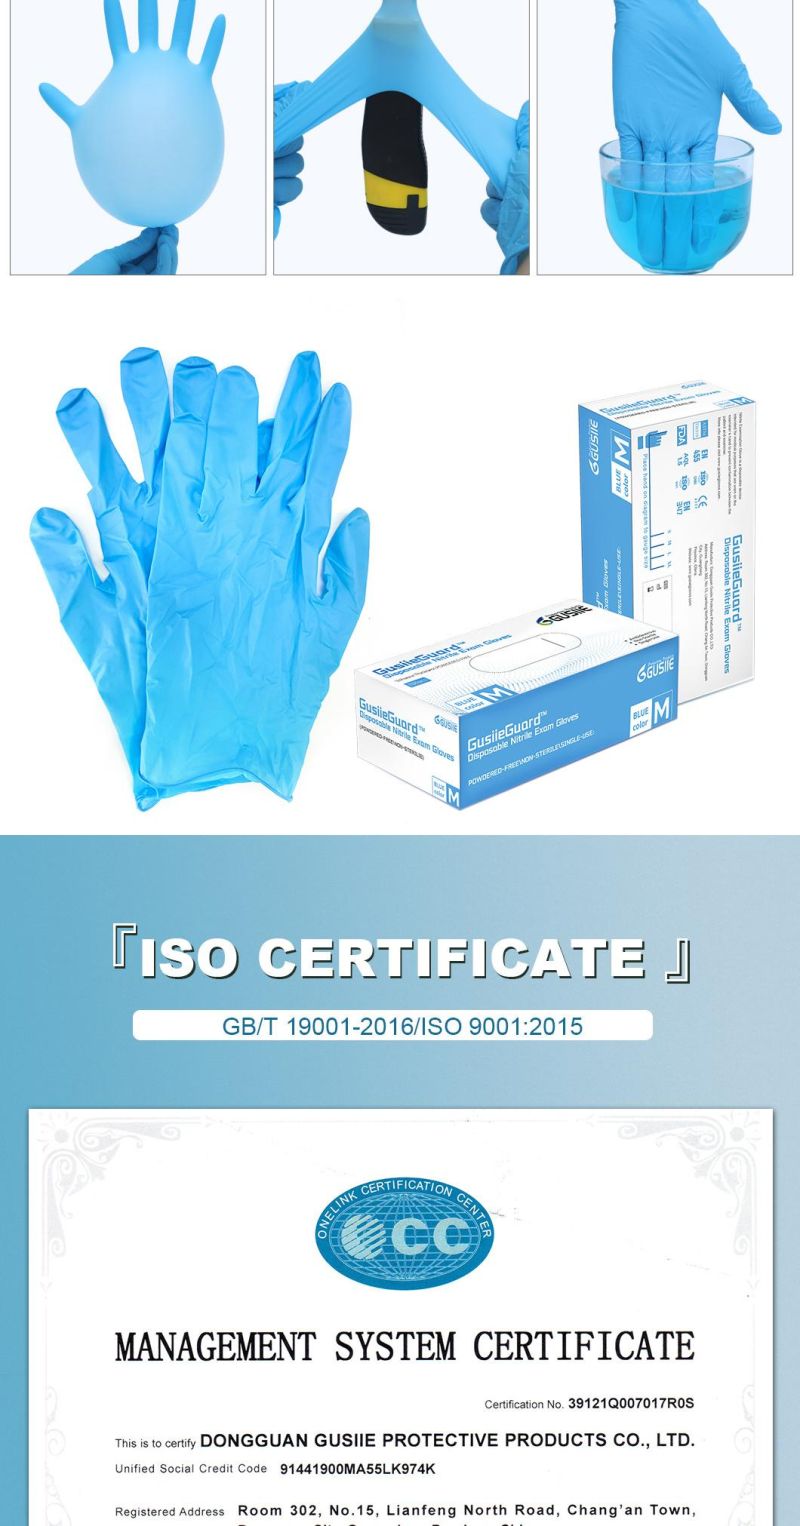 Gusiie Disposabl Emedical Examation Protective Large Nitrile Gloves